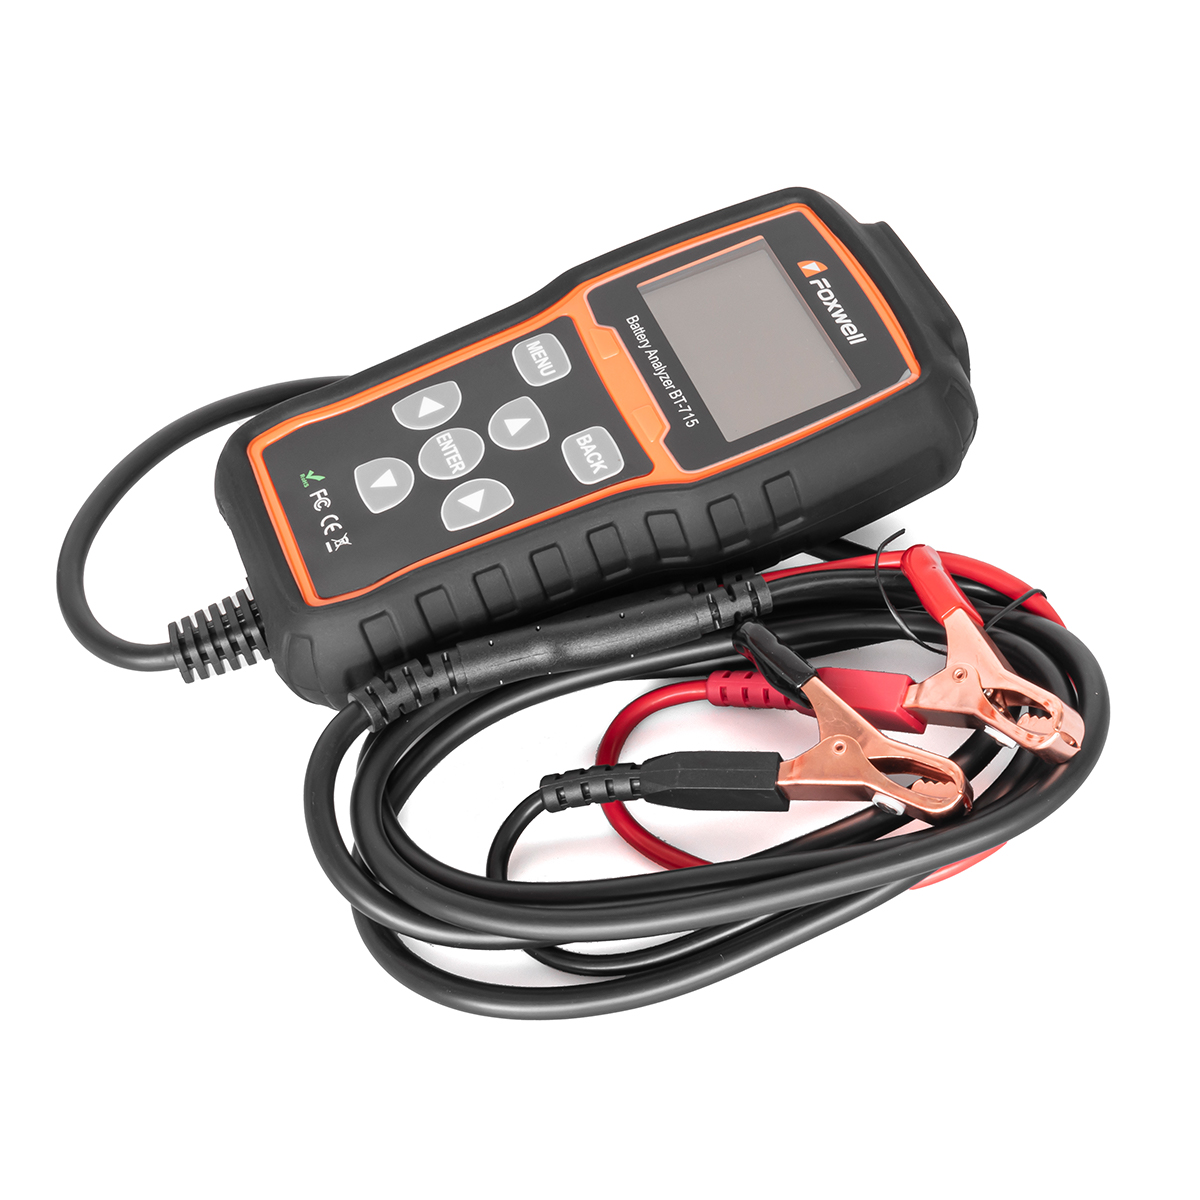 Hot Selling Foxwell BT-715 Battery Analyzer Support Multi-Language Car Fault Diagnostic Scanner Tool BT715 Battery Tester